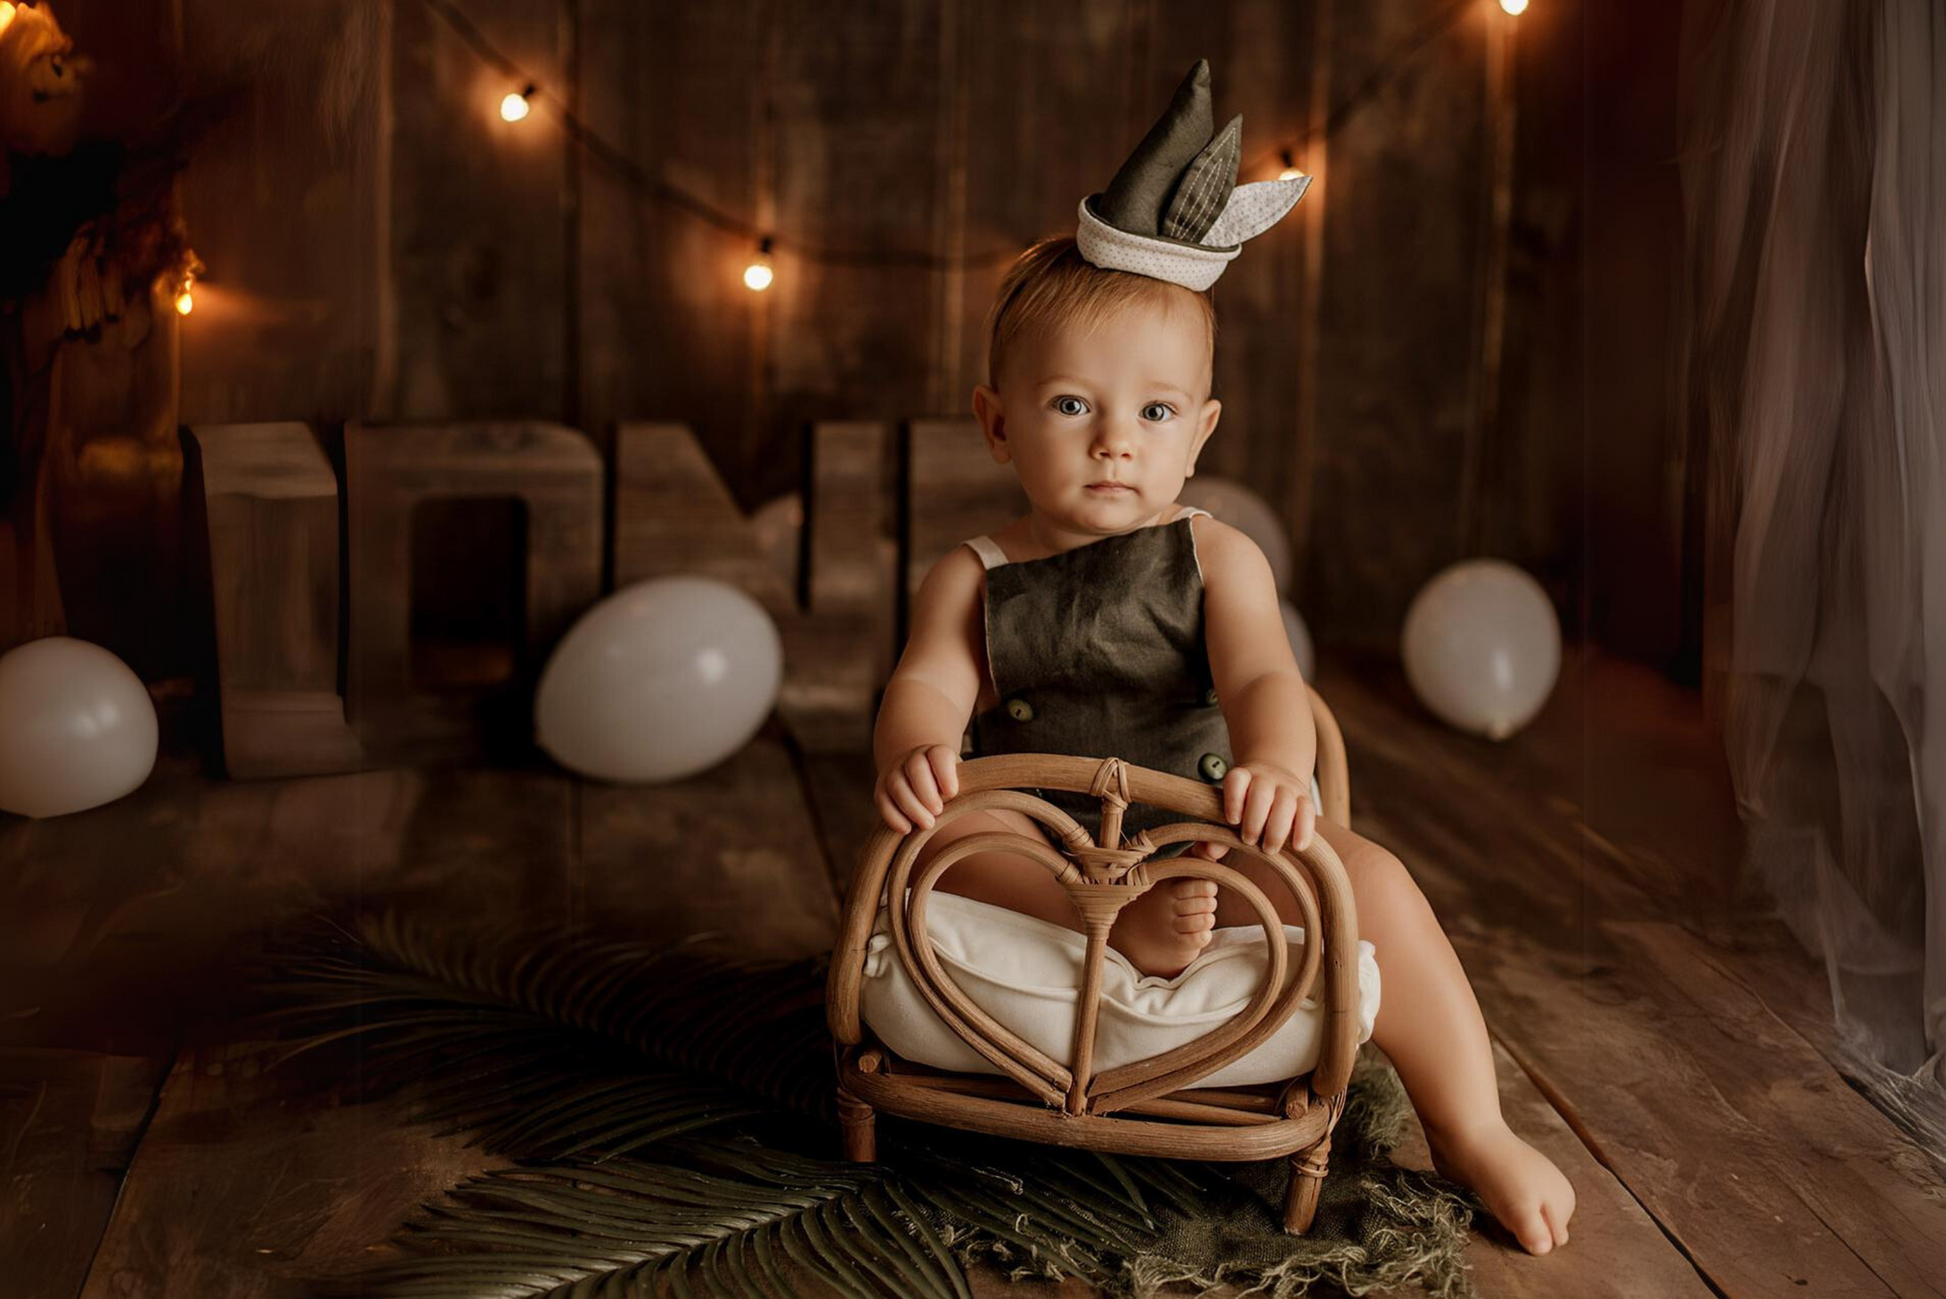 A baby sits in a 'Rattan Love Nest Bed' prop, crowned with a tiny sailor hat, creating a serene mood in this newborn photography setup.